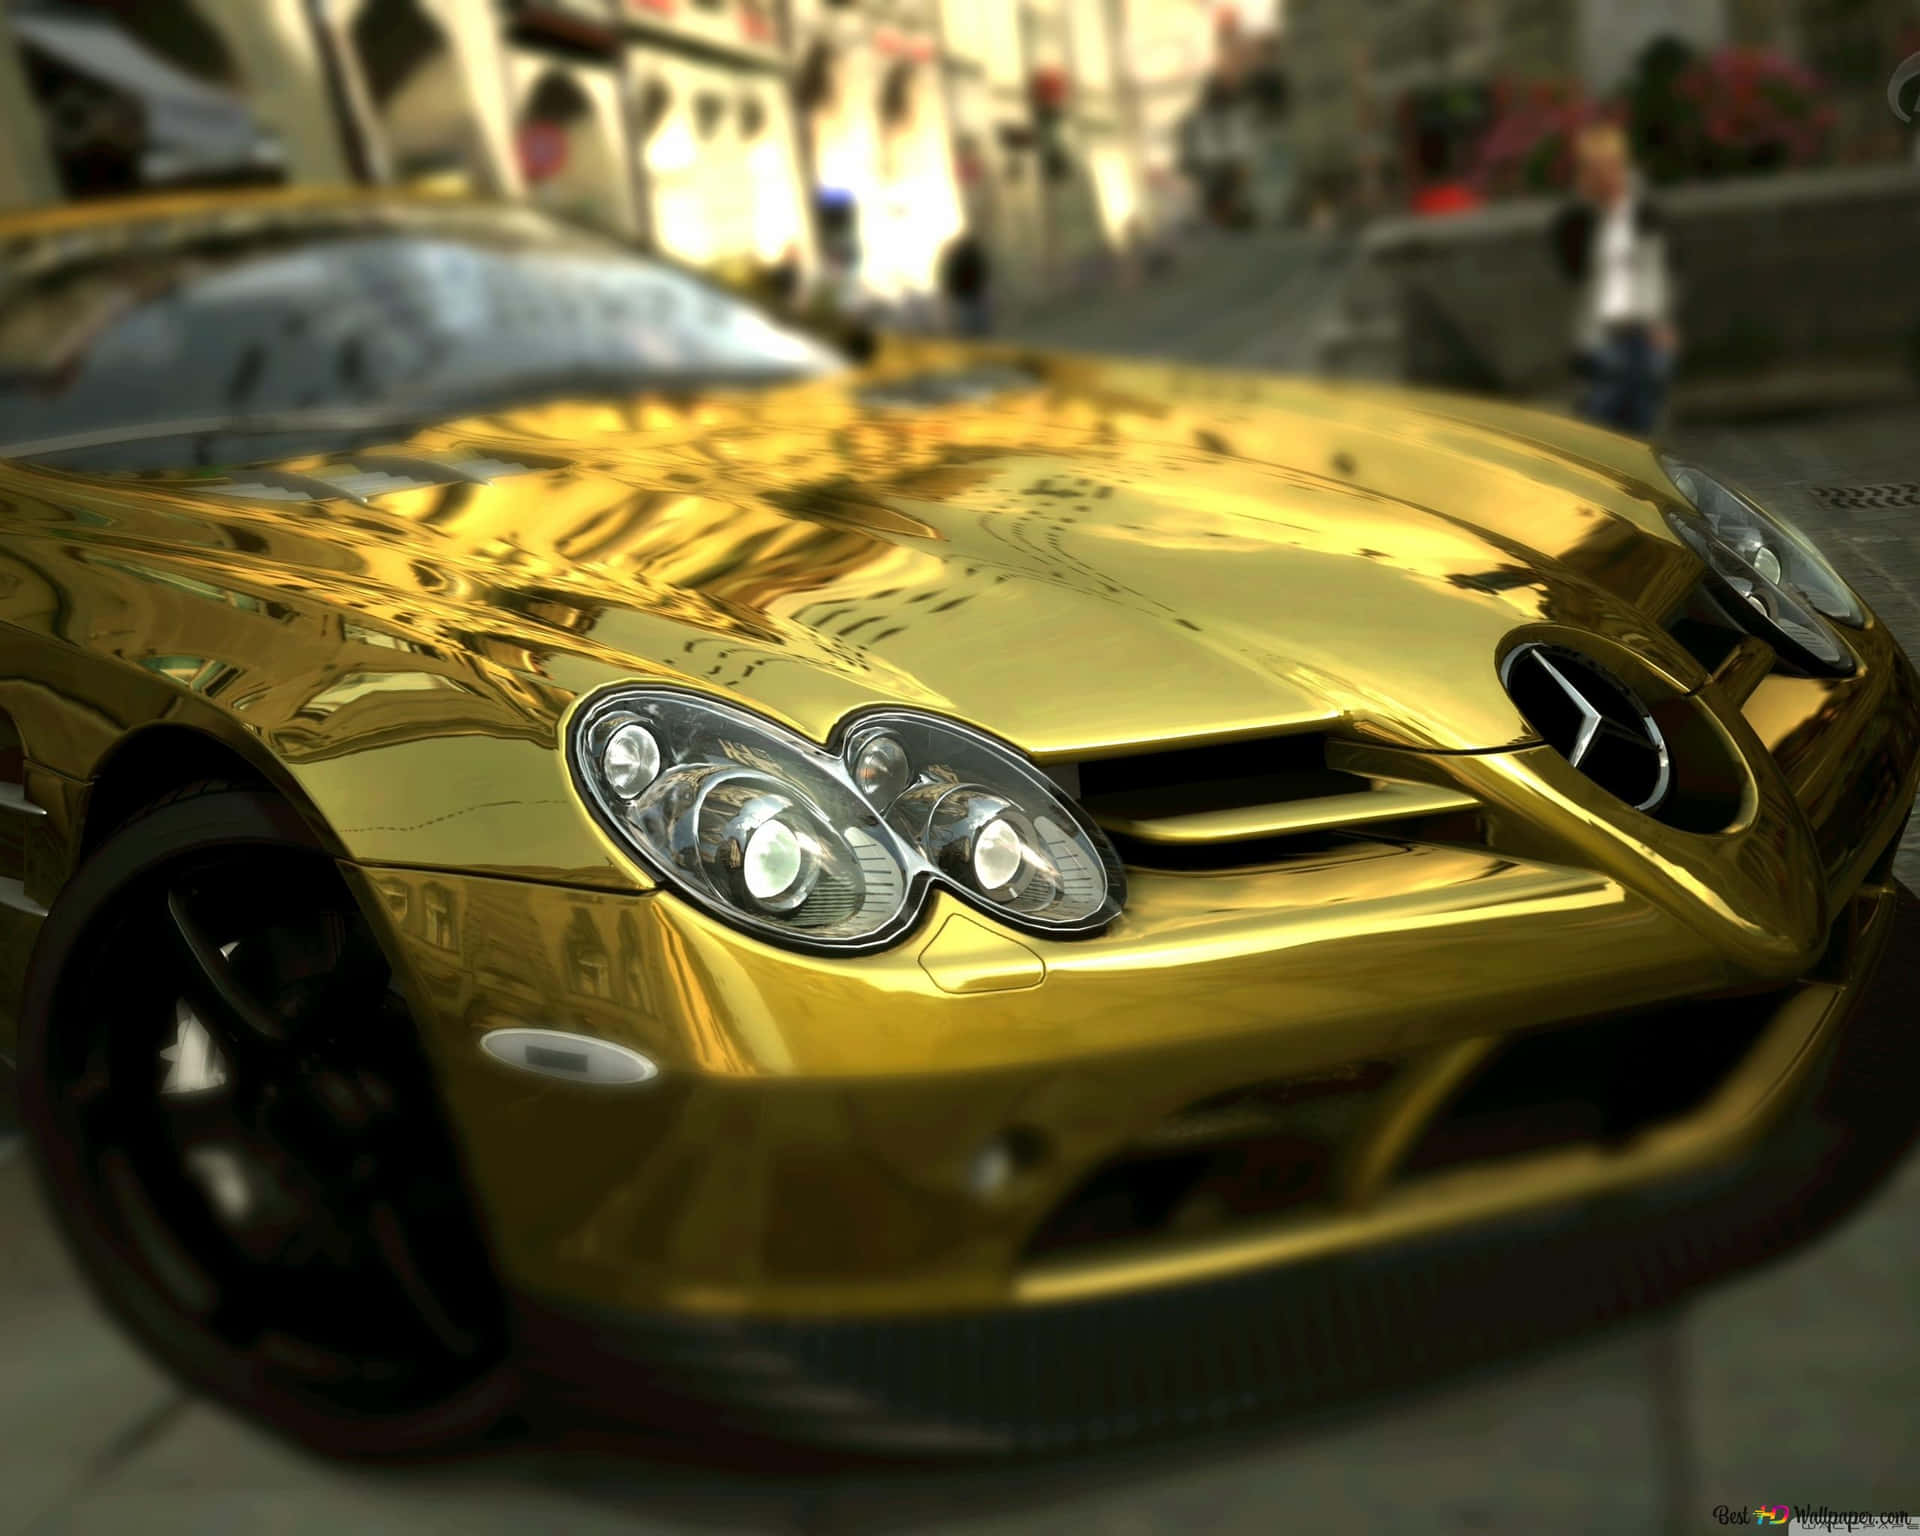 Shiny Gold Cars Mercedes Benz Background